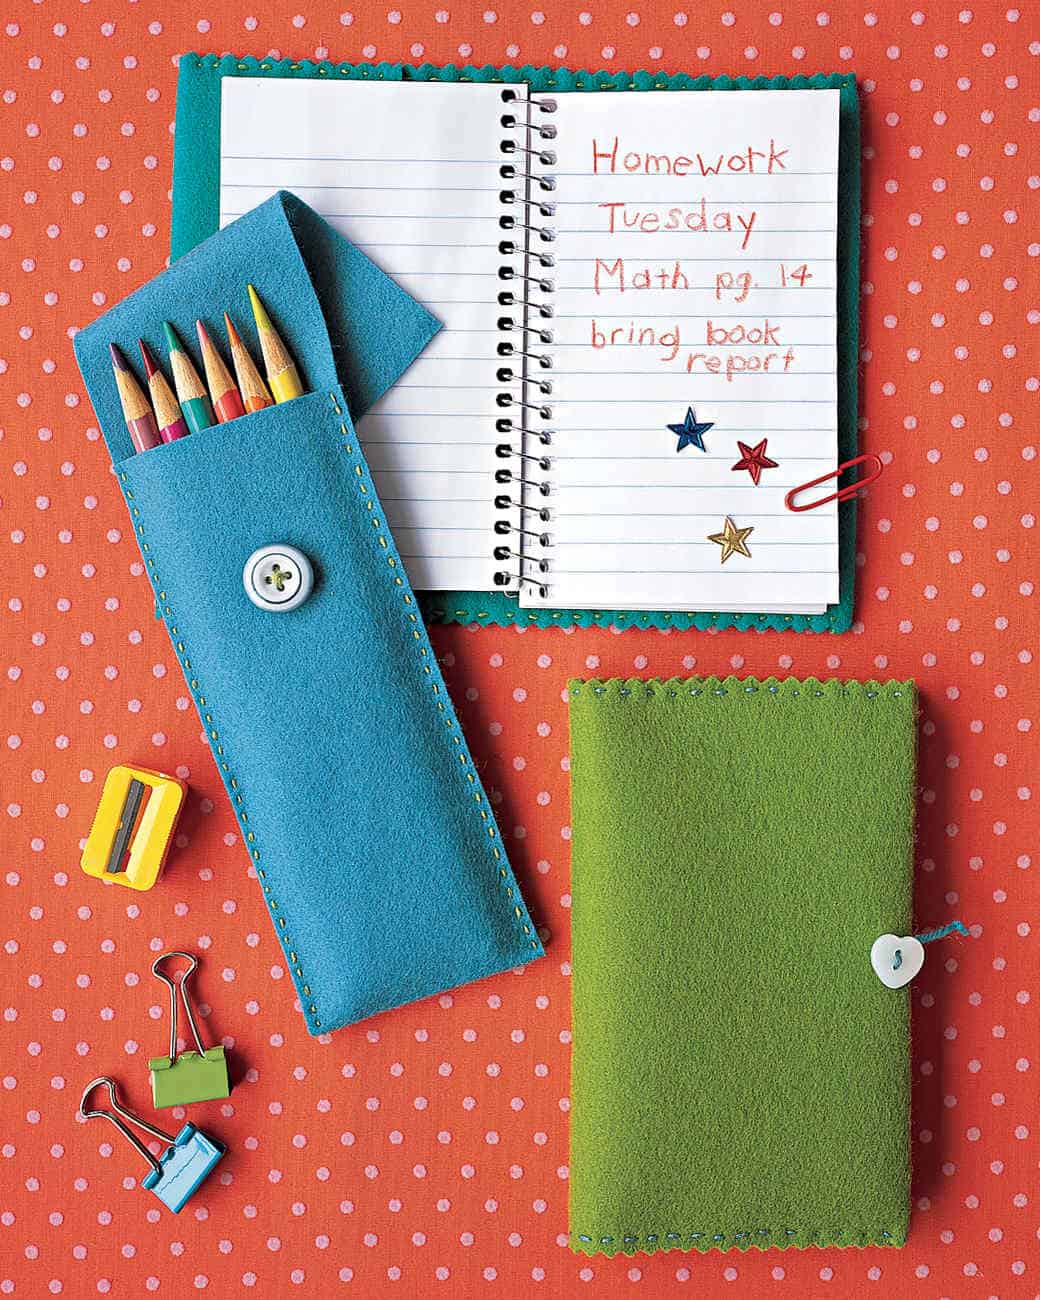 Make Your Own Pencil Case  Crafts for Kids 